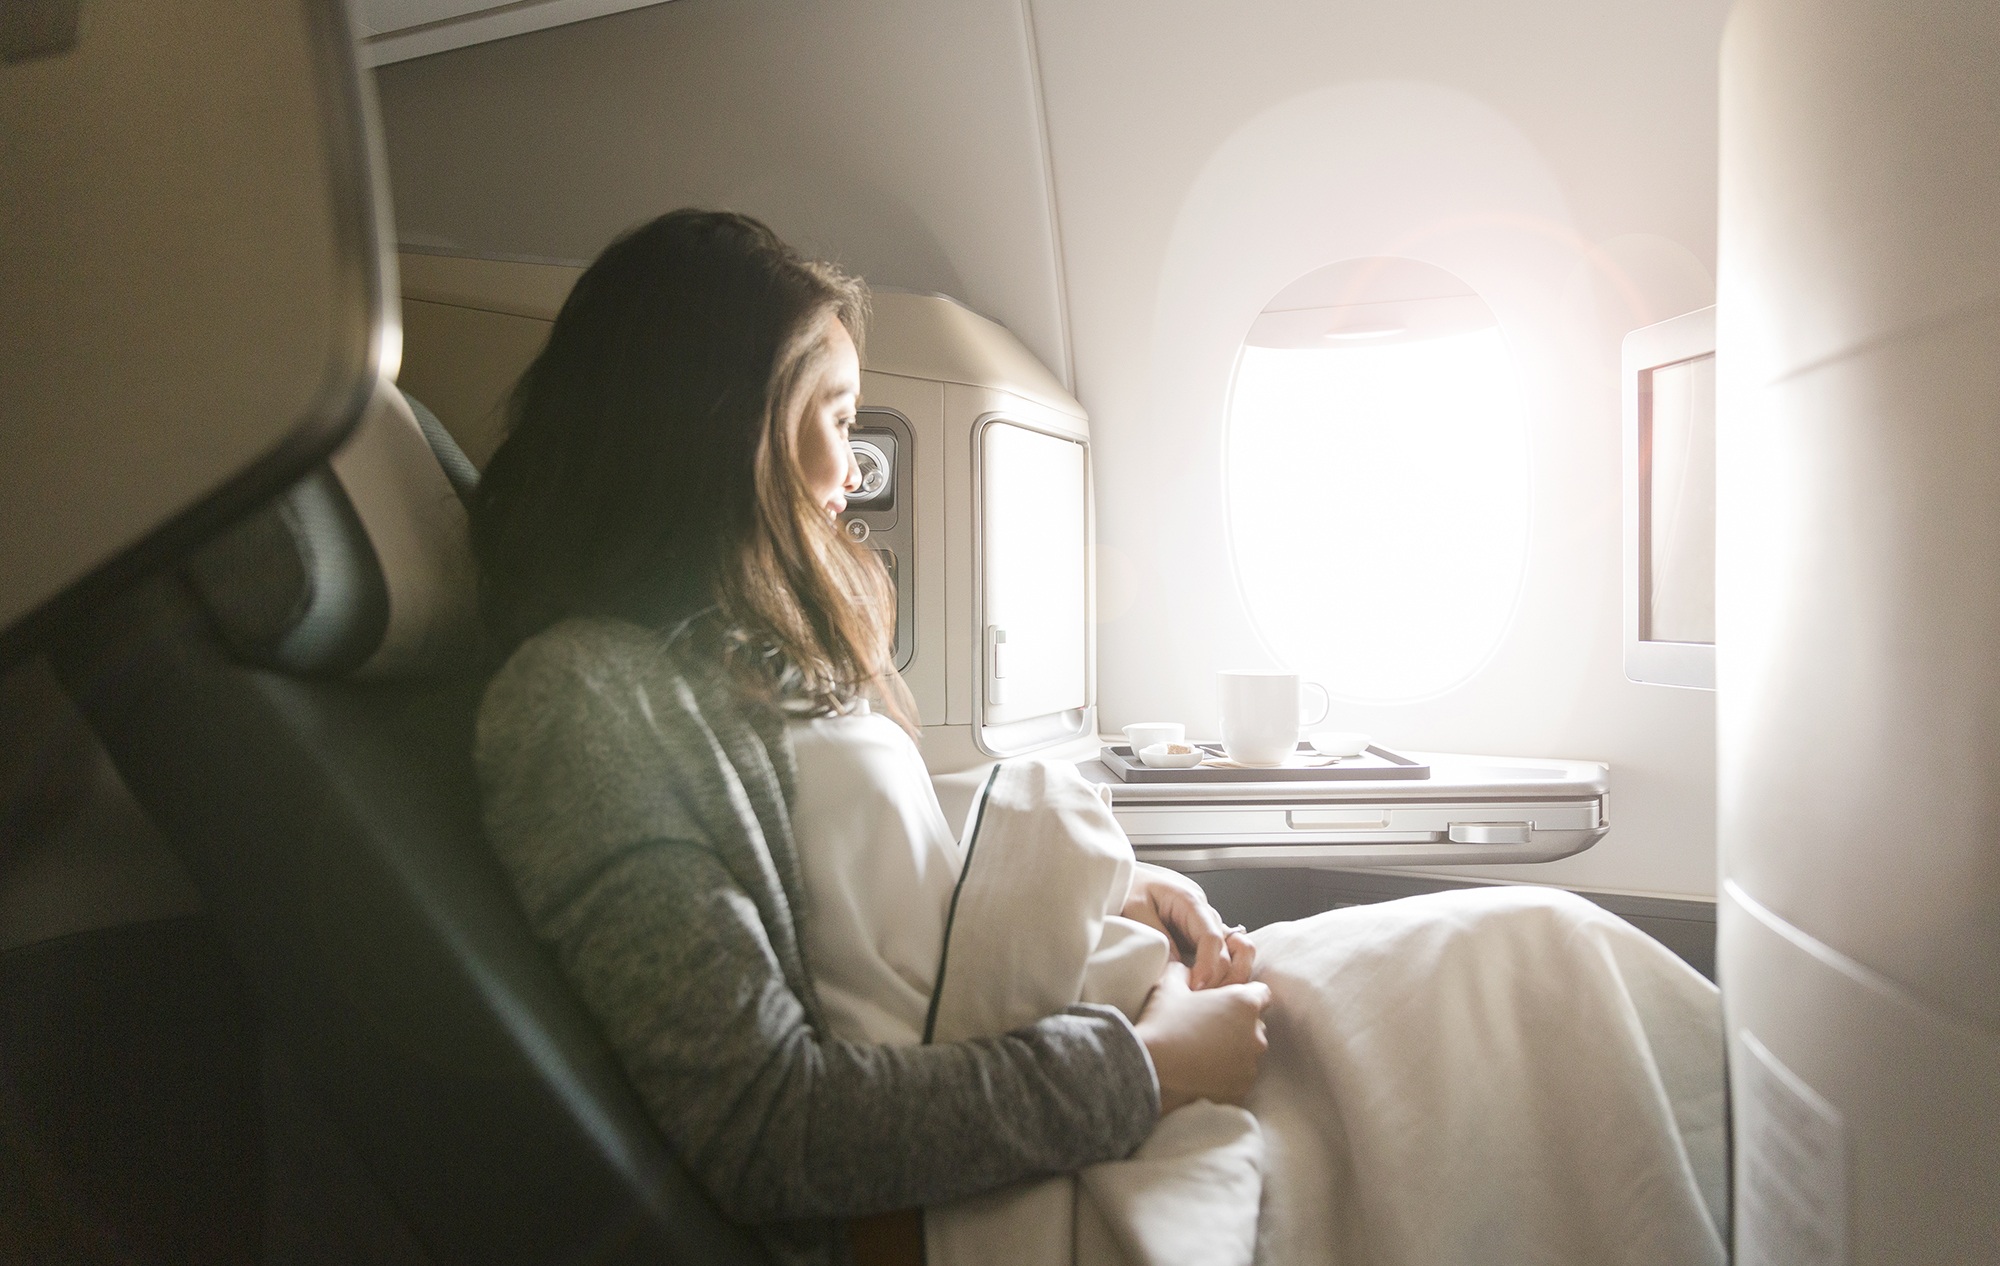 Woman under blanket on Cathay Pacific flight looking out window